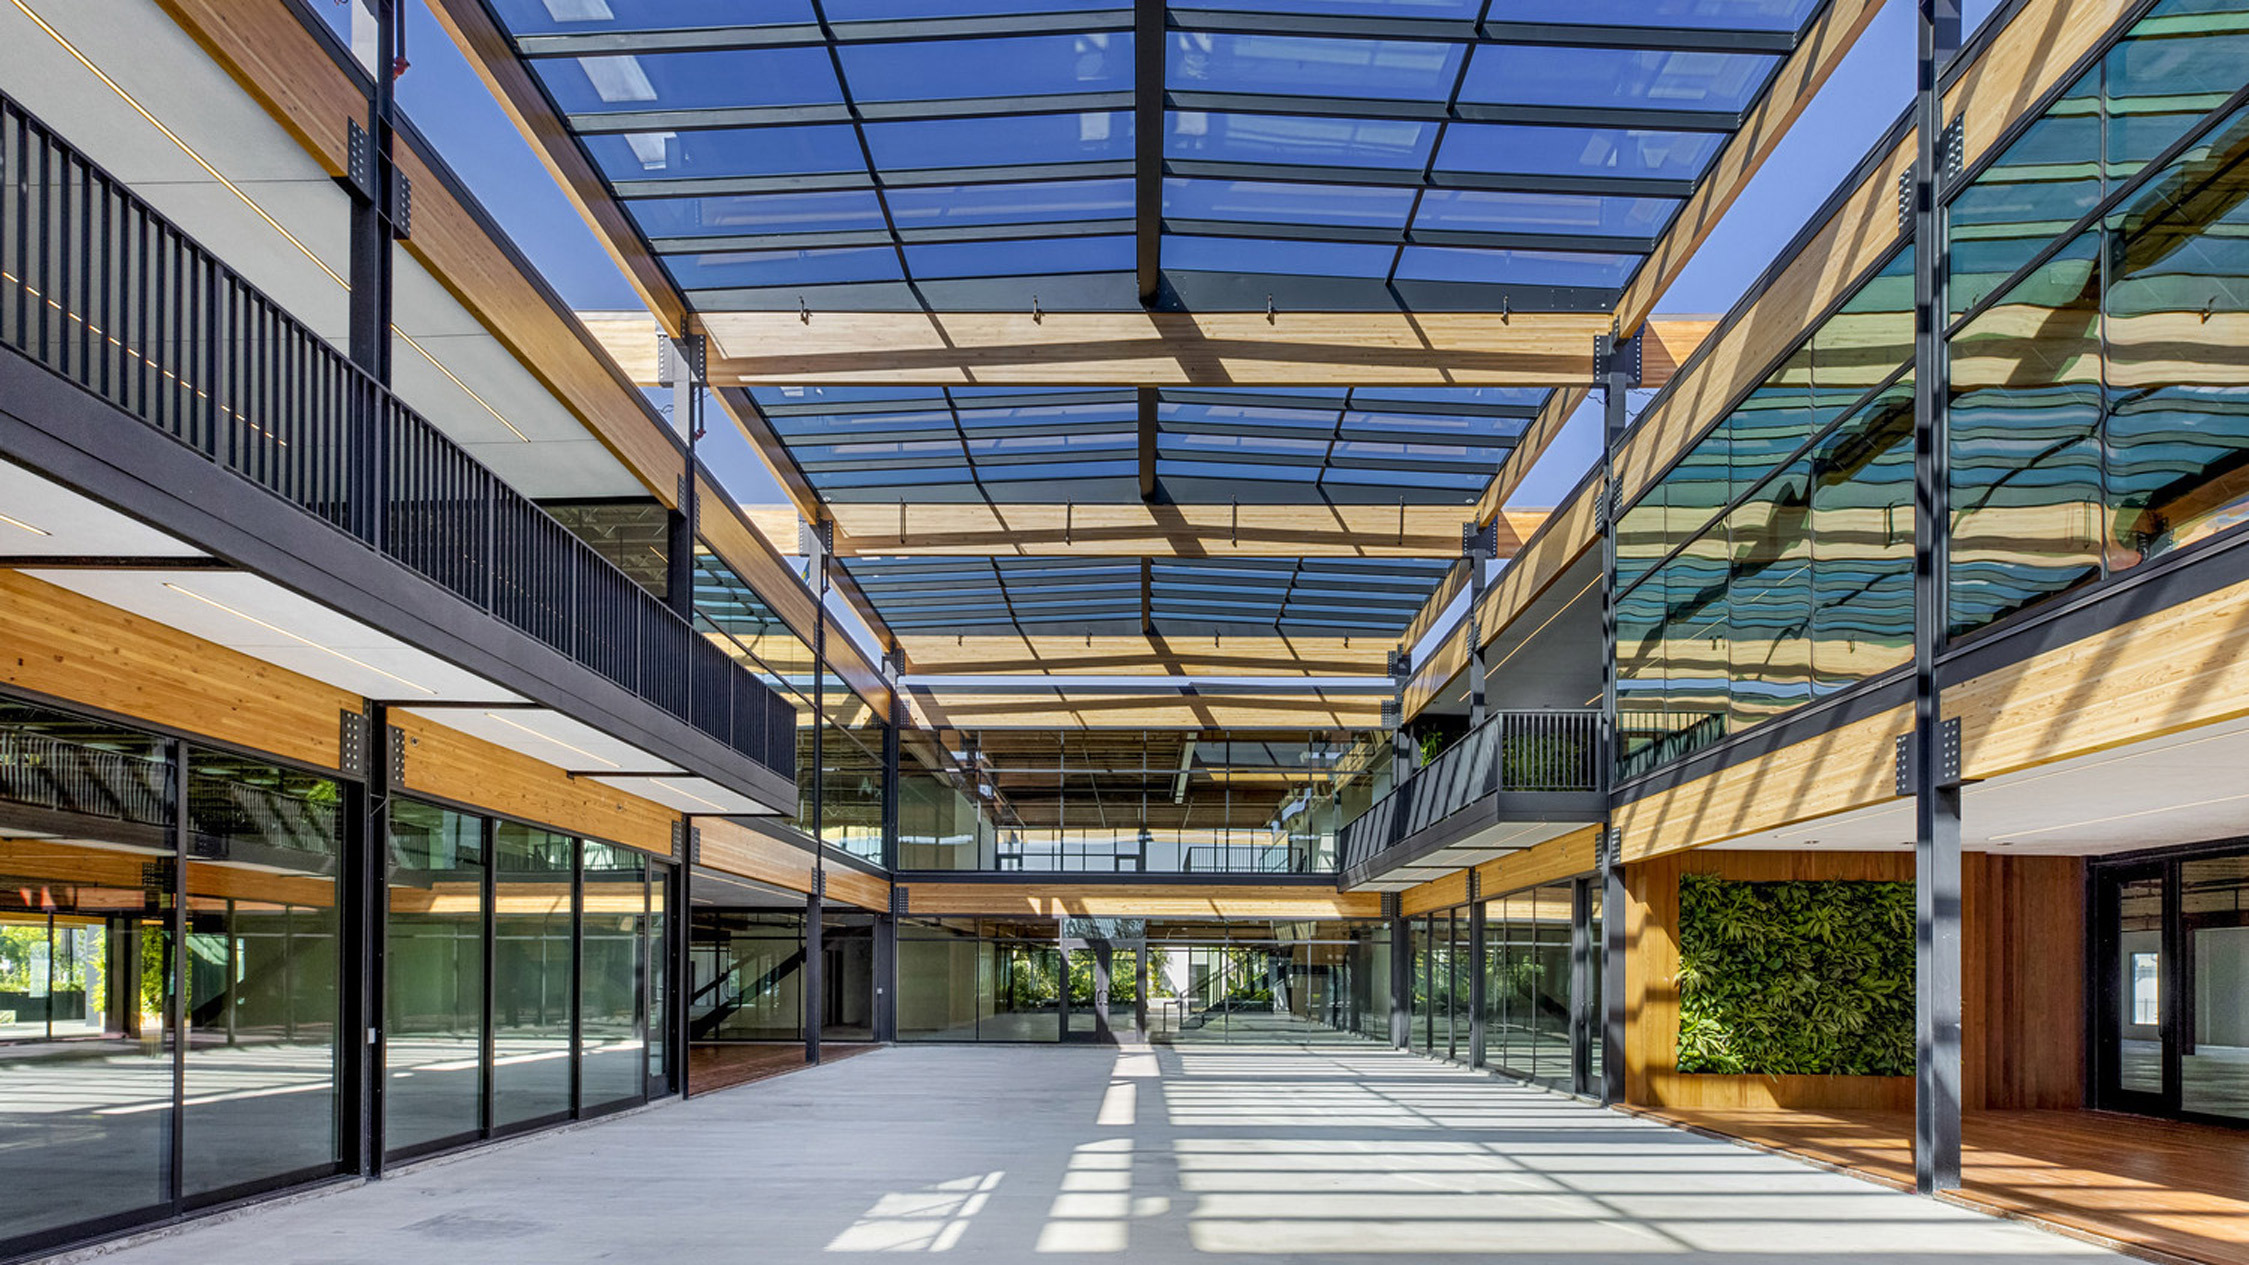 Spacious atrium with a vaulted glass ceiling allowing natural light to illuminate the sleek, wooden beams and modern, open-plan walkways flanking a central courtyard.